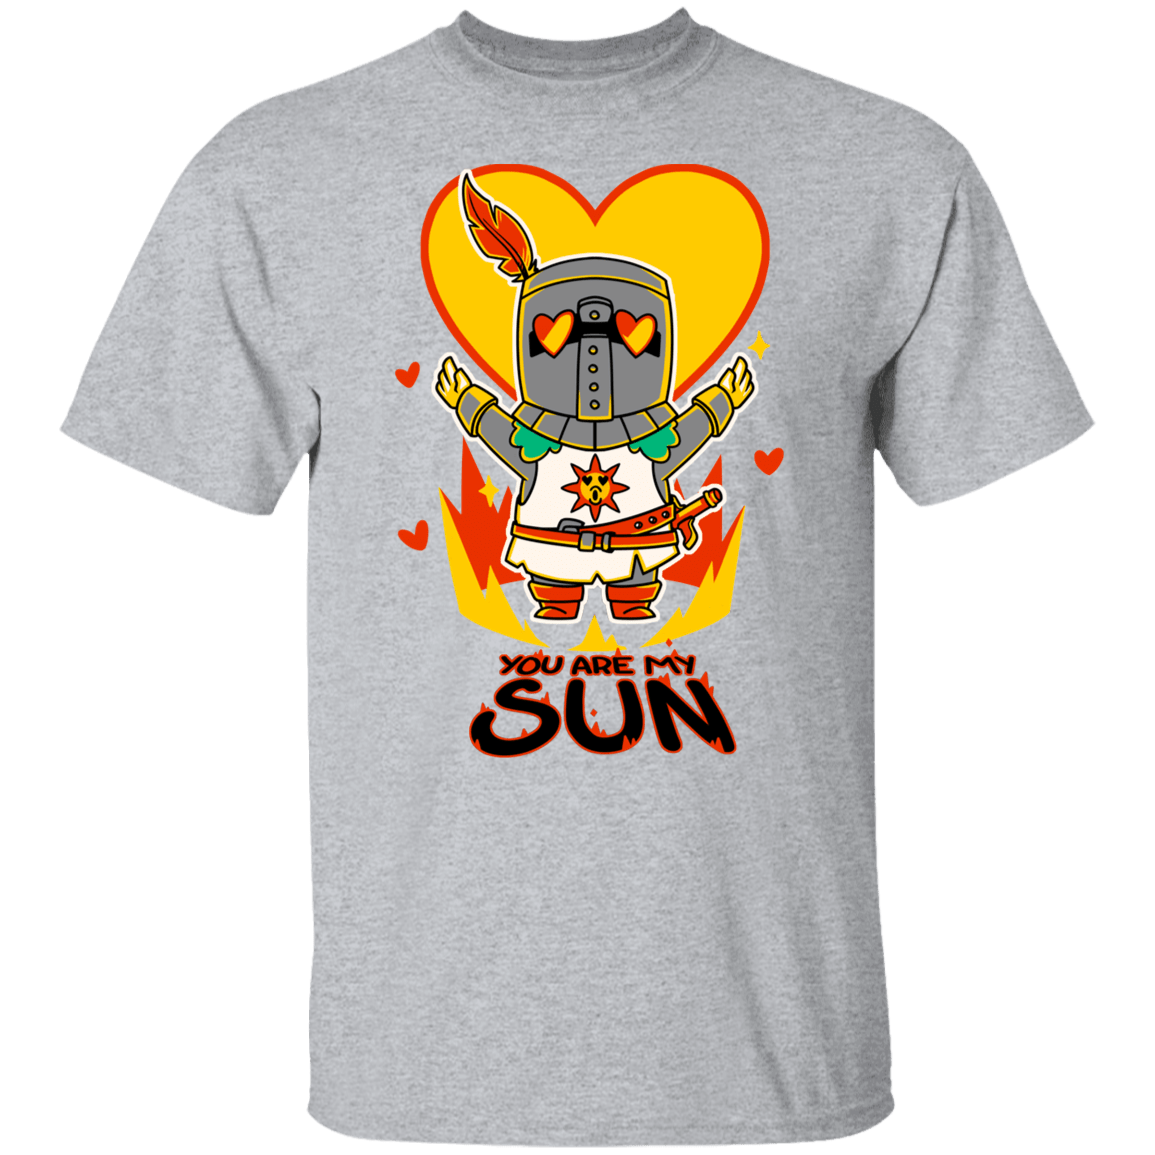 T-Shirts Sport Grey / S You are my SUN T-Shirt